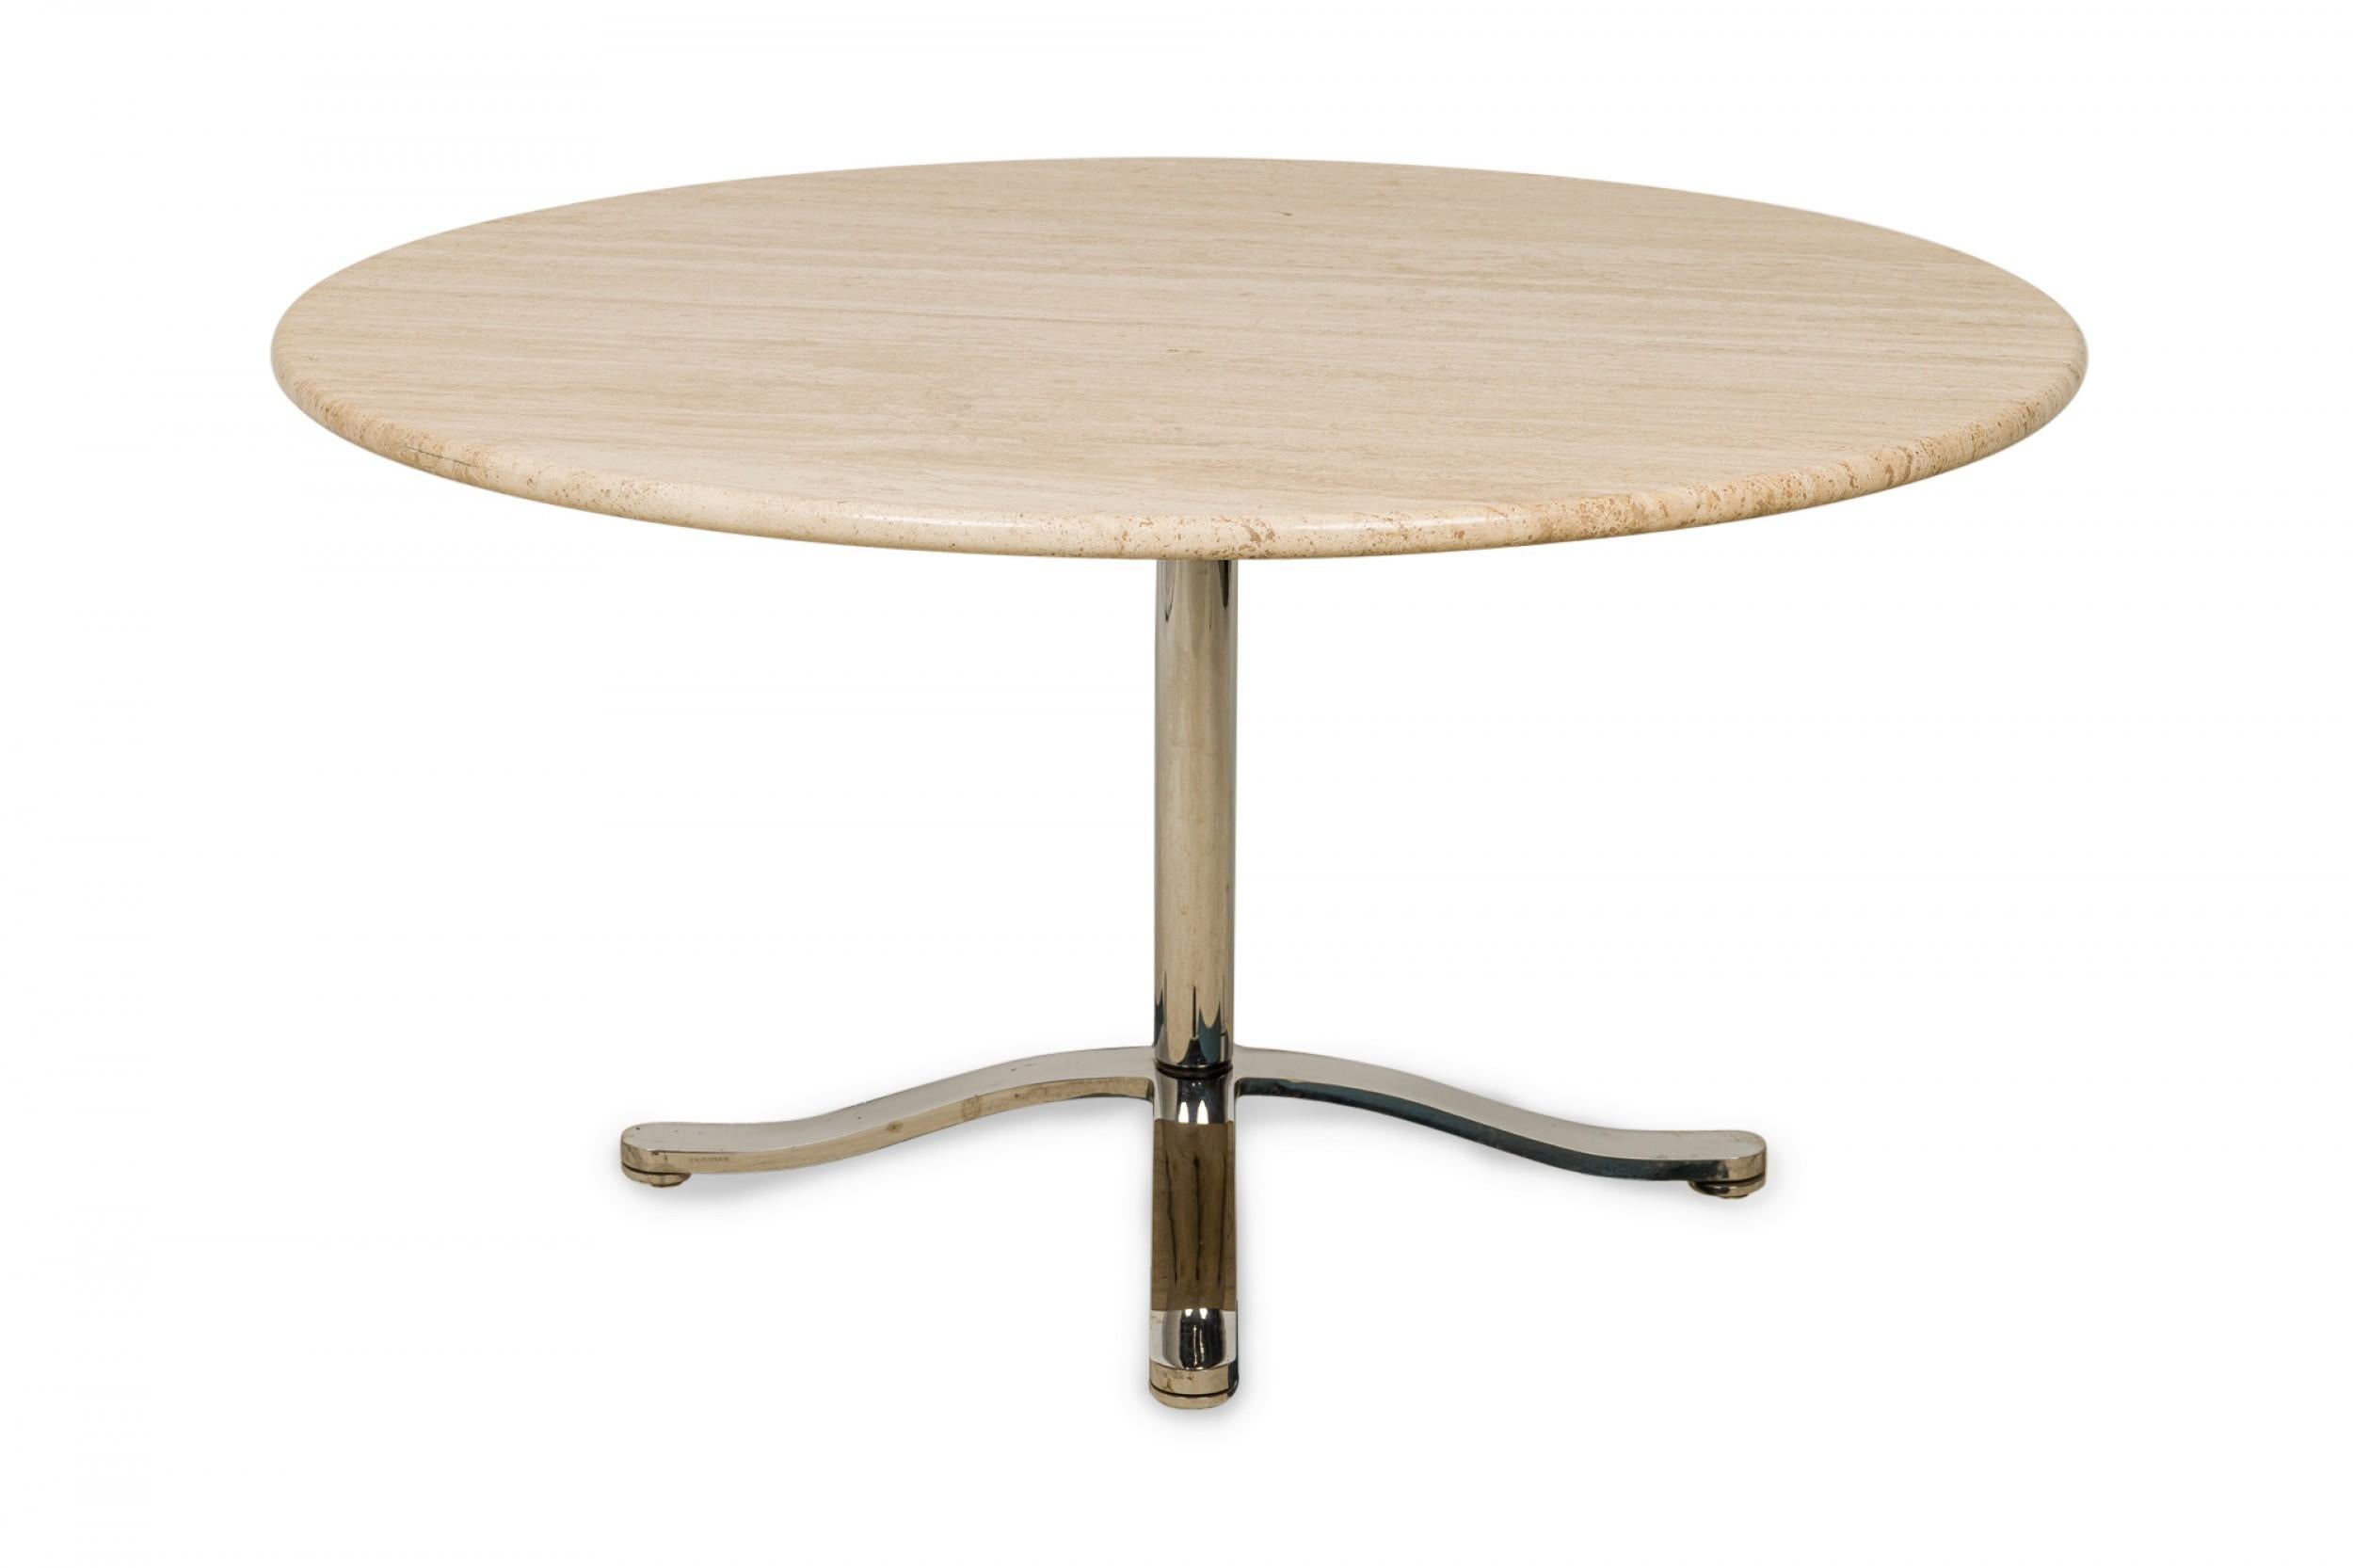 American Mid-Century circular dining table with a travertine top supported by a polished steel pedestal base with an x-shaped foot. (NICOS ZOGRAPHOS)